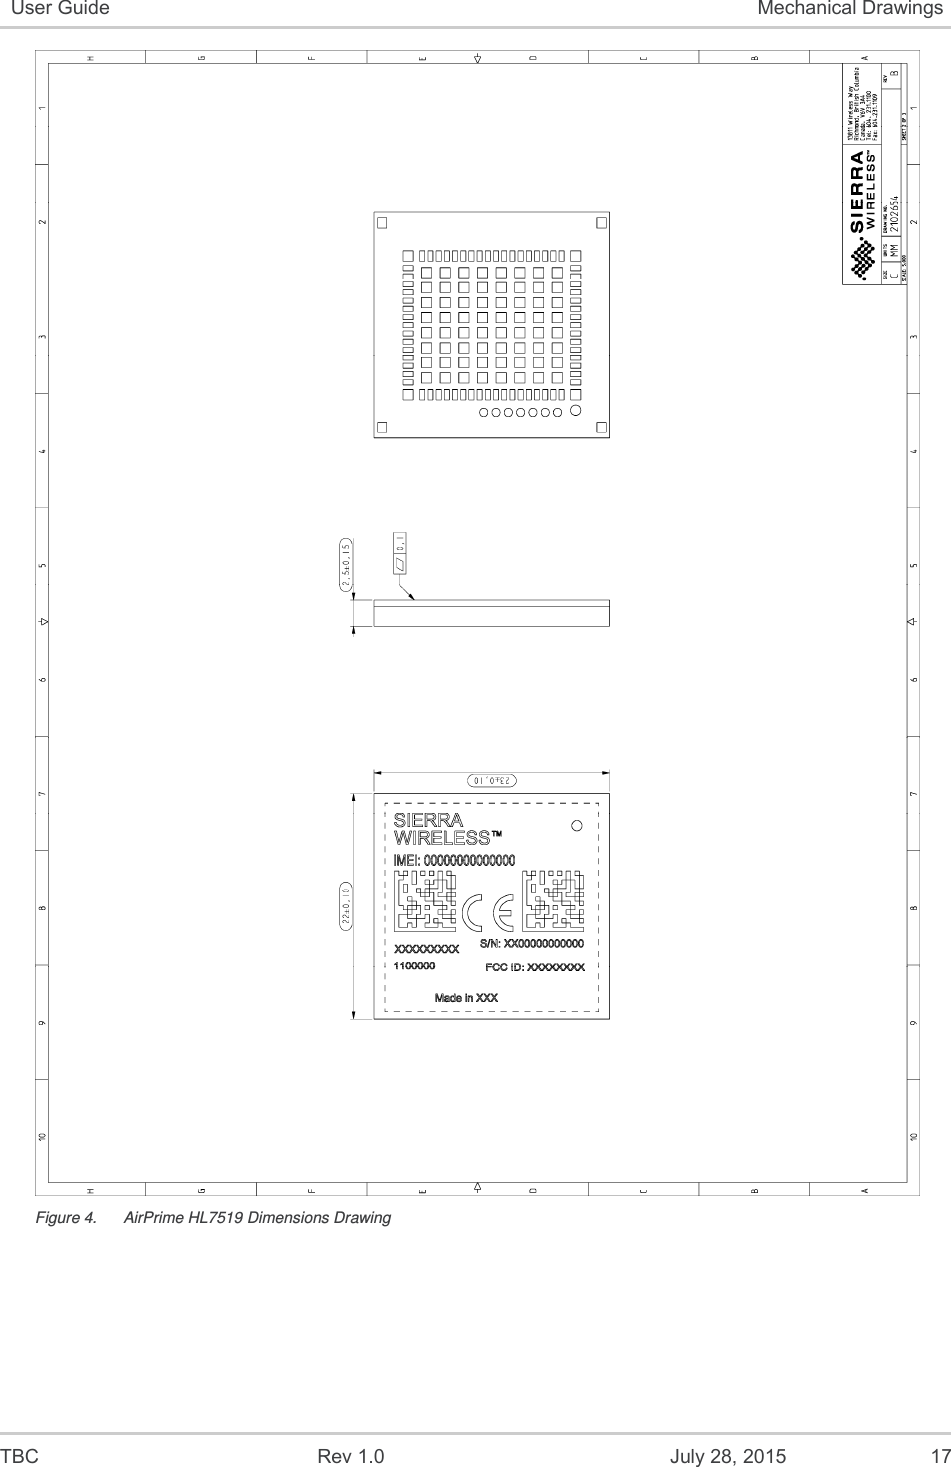  TBC  Rev 1.0  July 28, 2015  17 User Guide  Mechanical Drawings  Figure 4.  AirPrime HL7519 Dimensions Drawing 